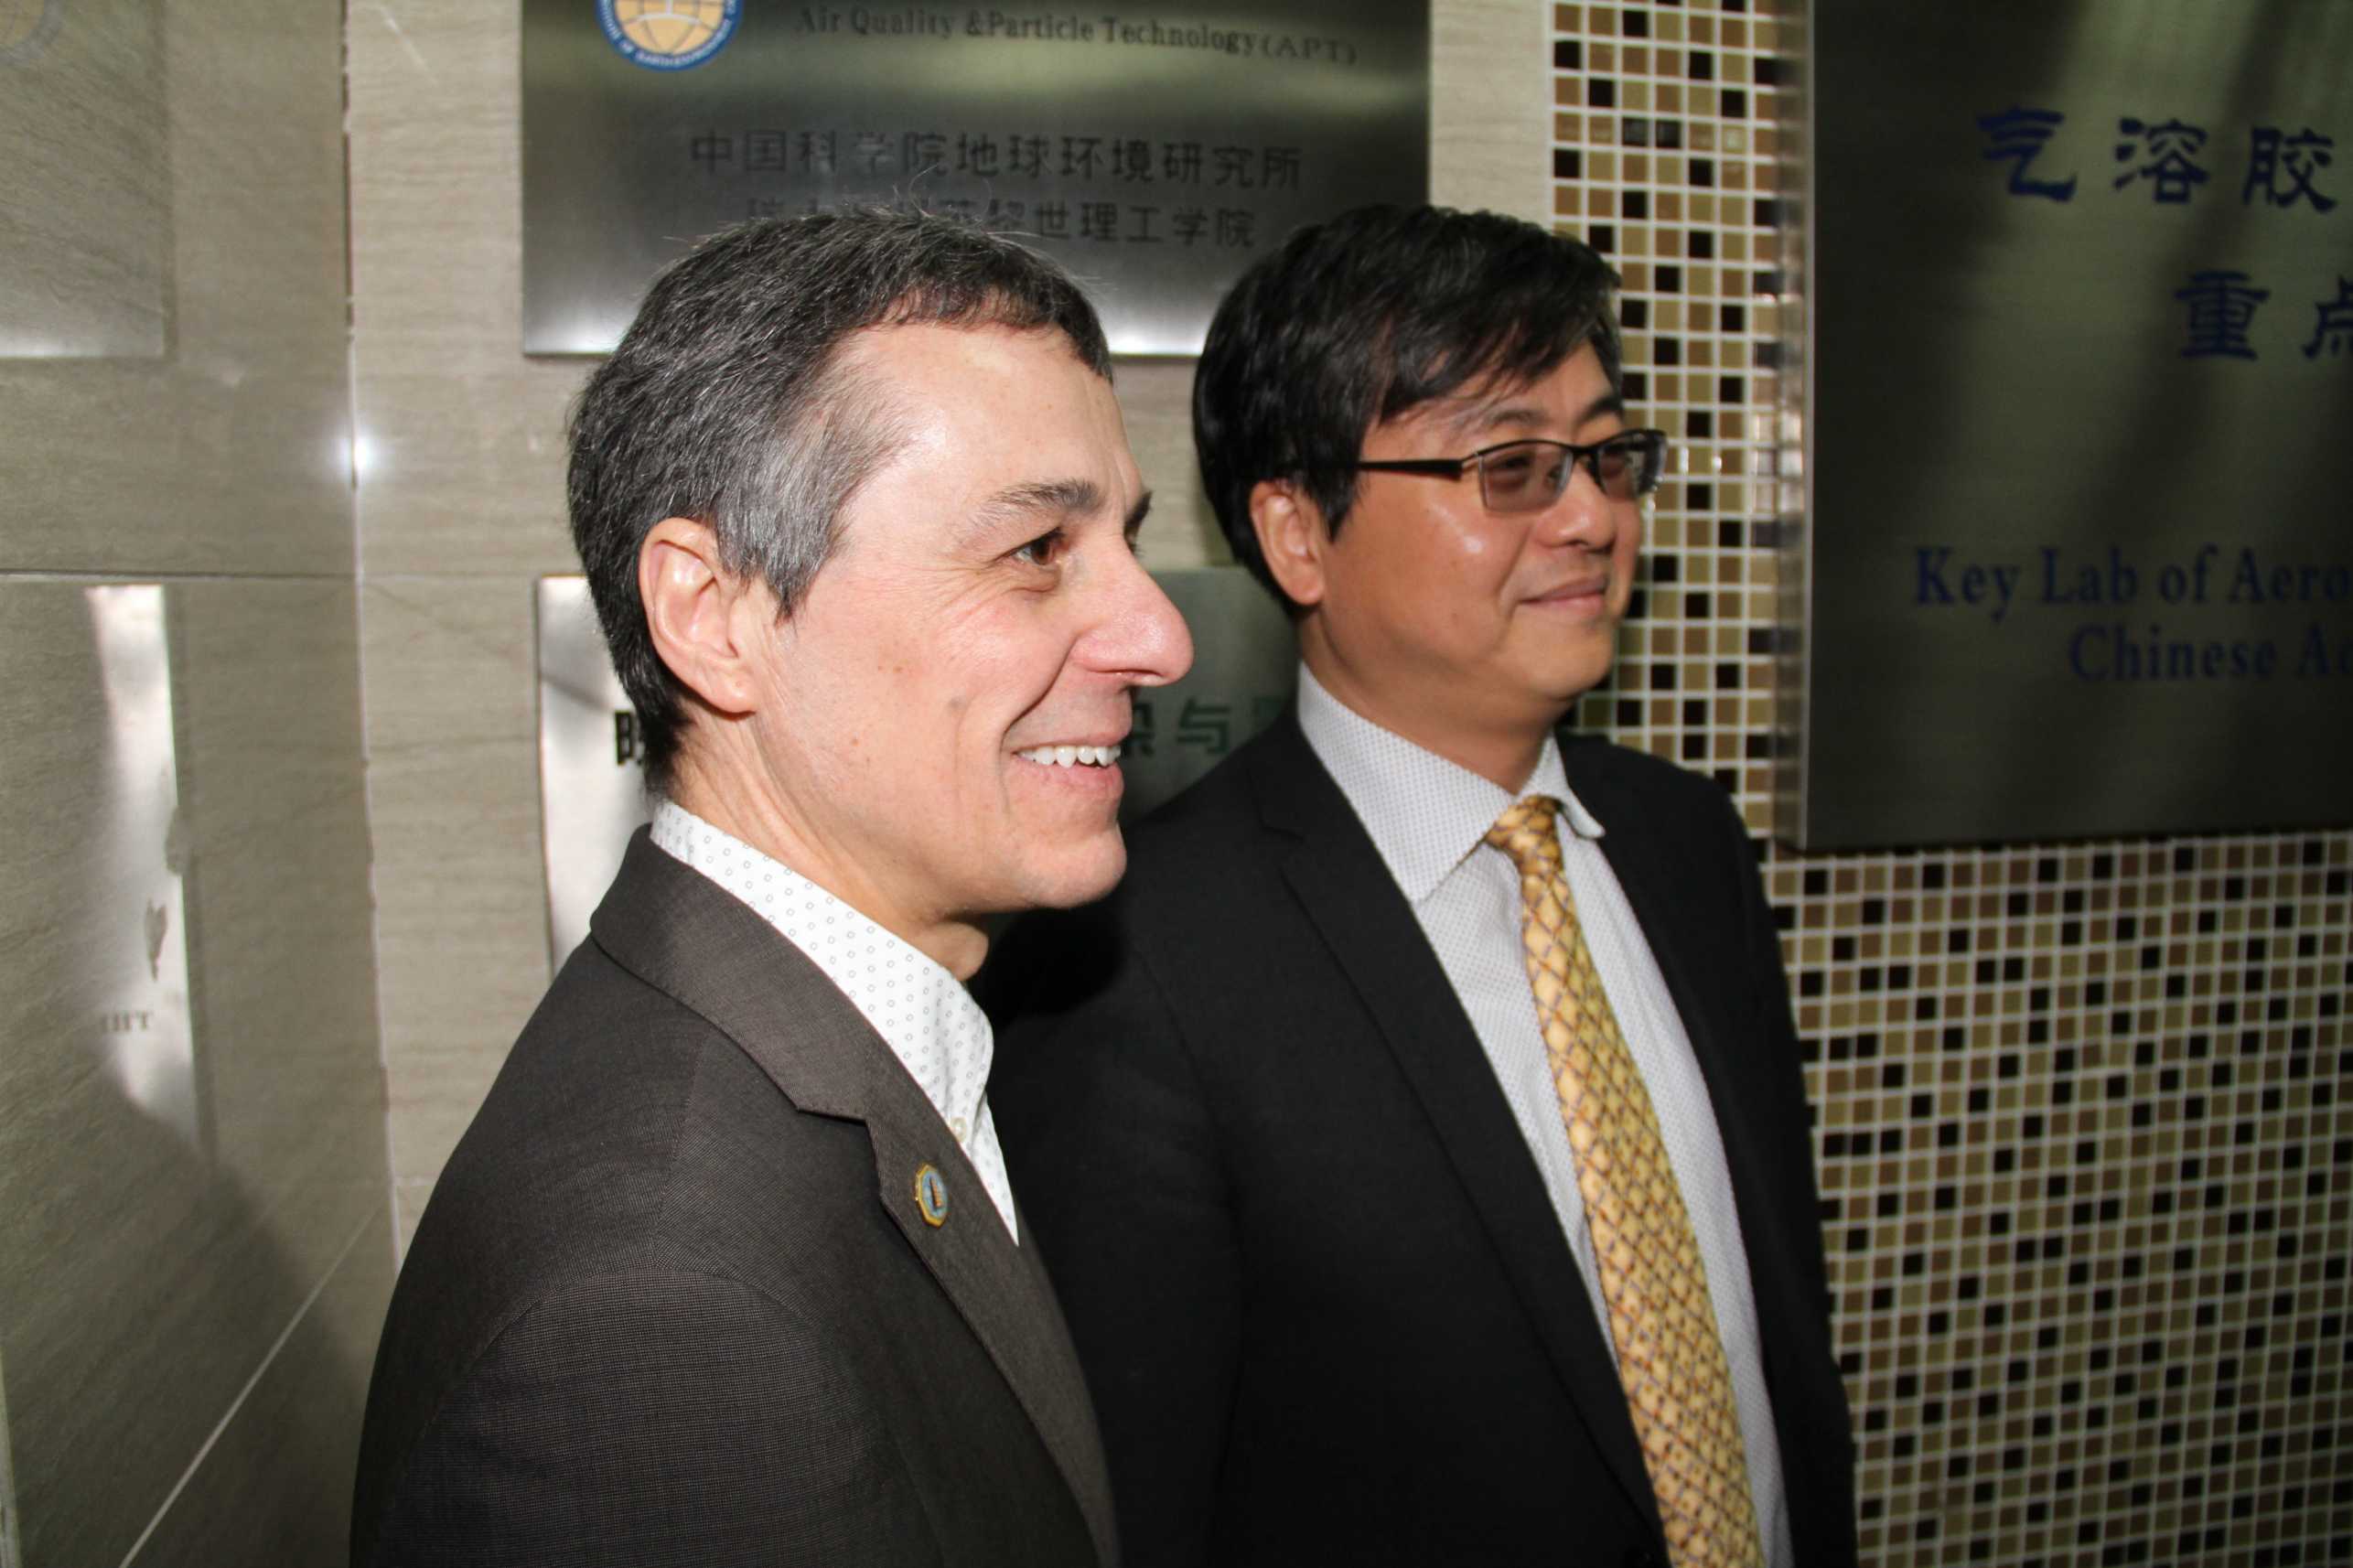 Federal Councillor Cassis and Prof. Cao